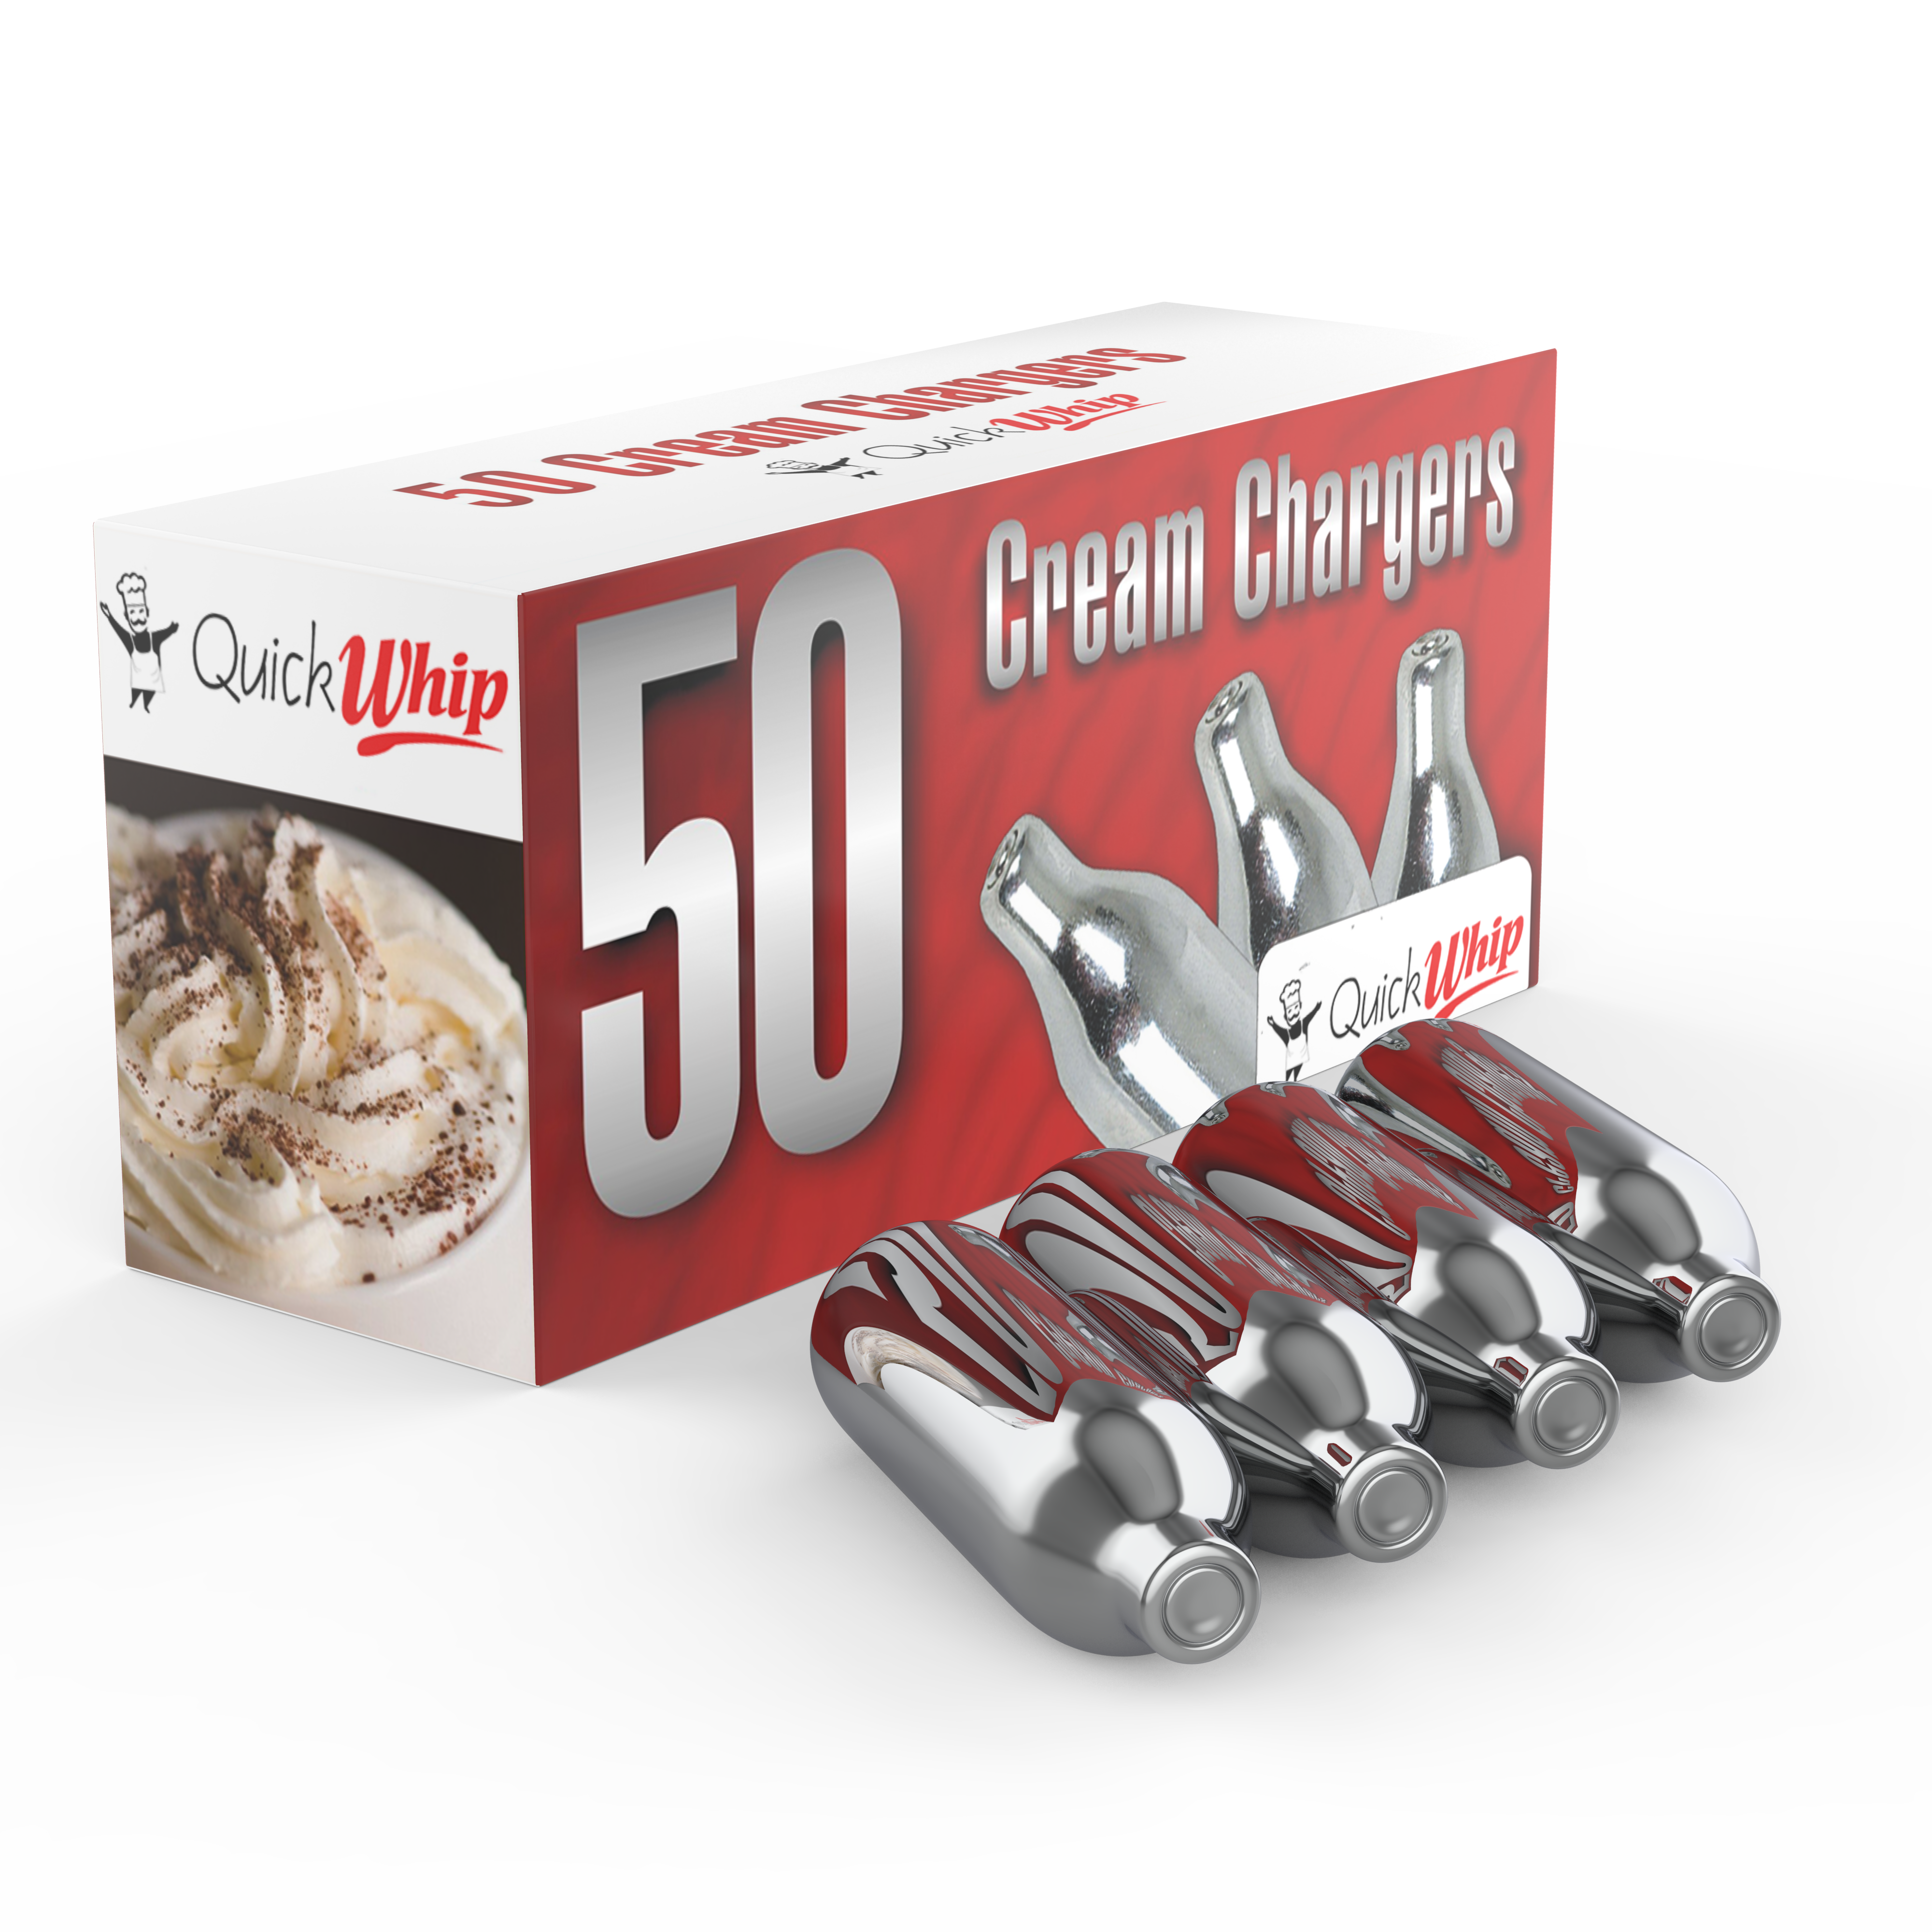 QuickWhip Cream Chargers 8g in 50pks - WHOLESALE